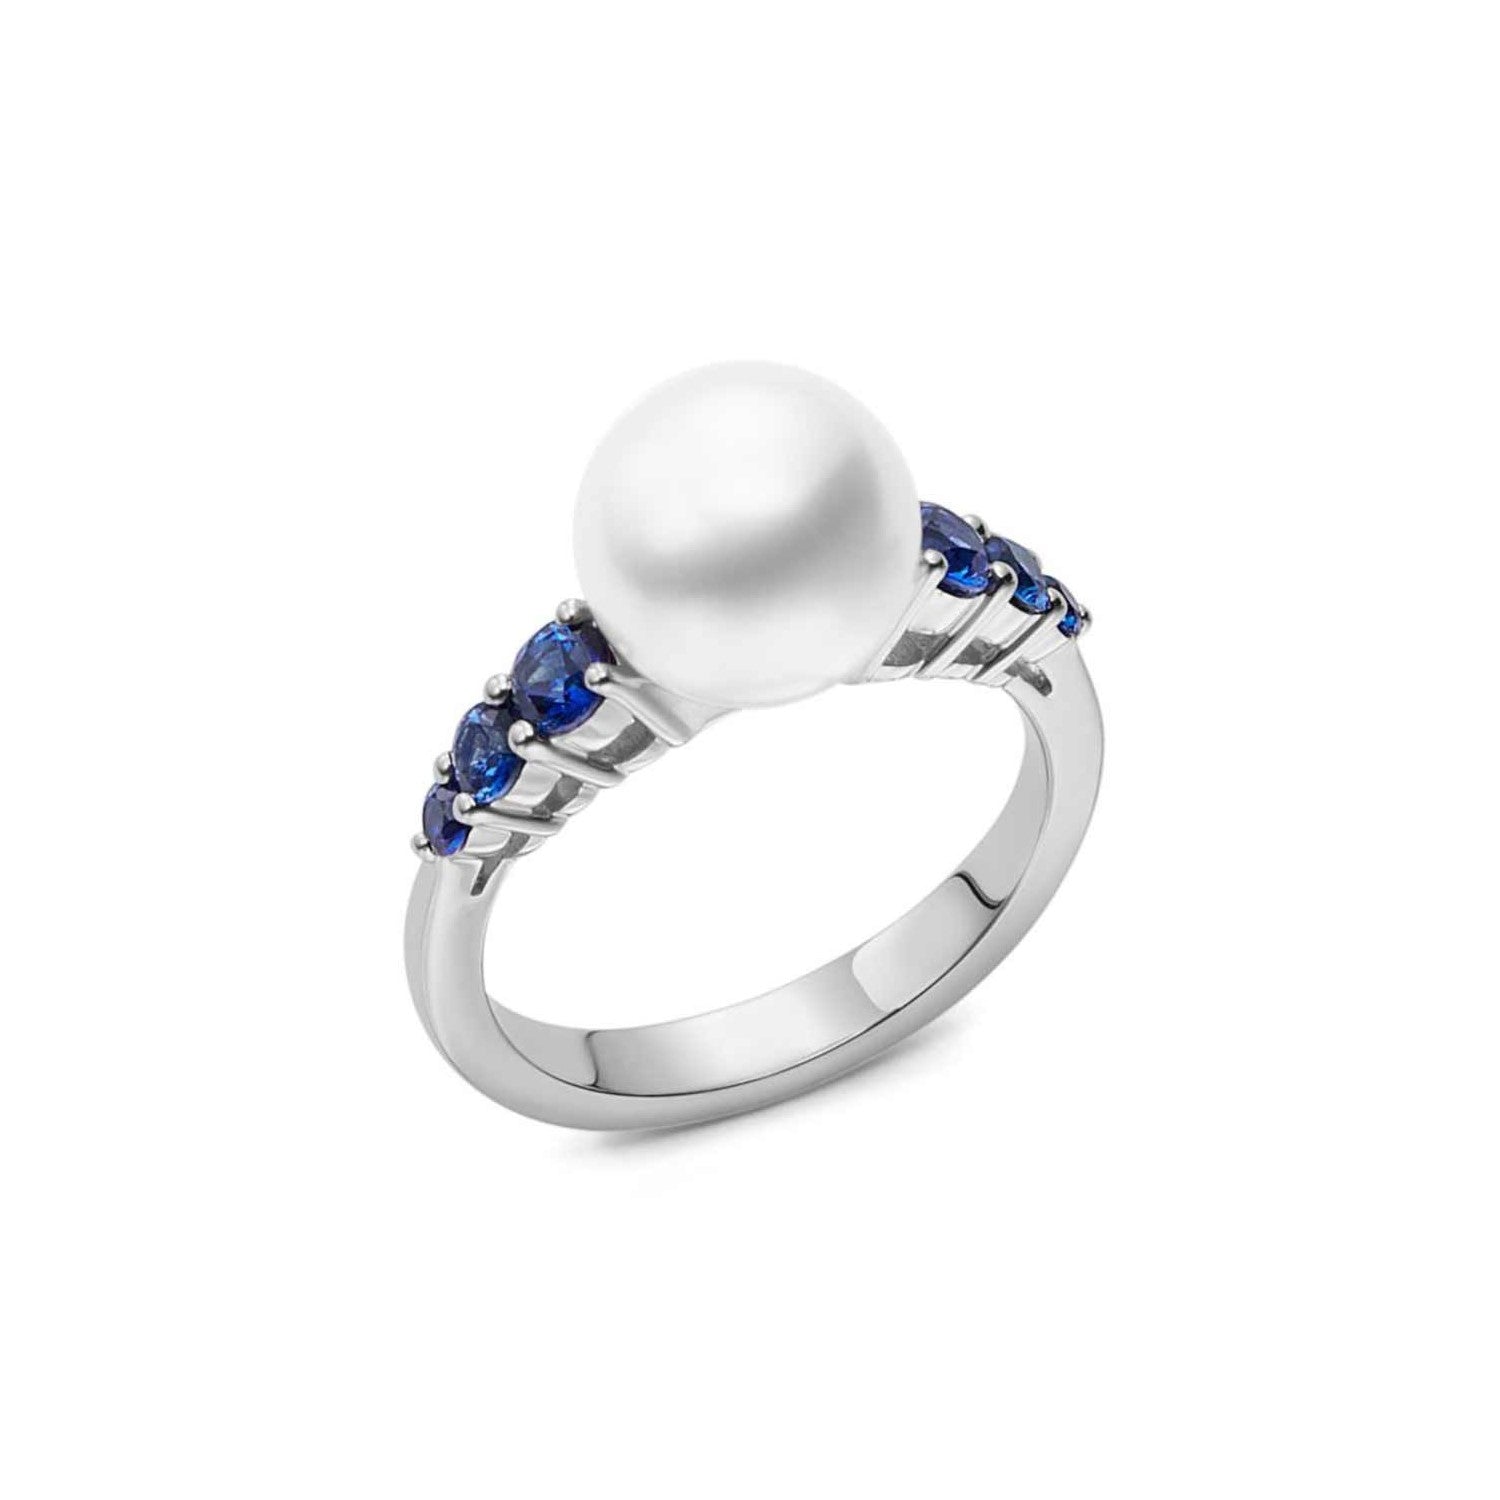 Mikimoto White South Sea Pearl and Sapphire Ring